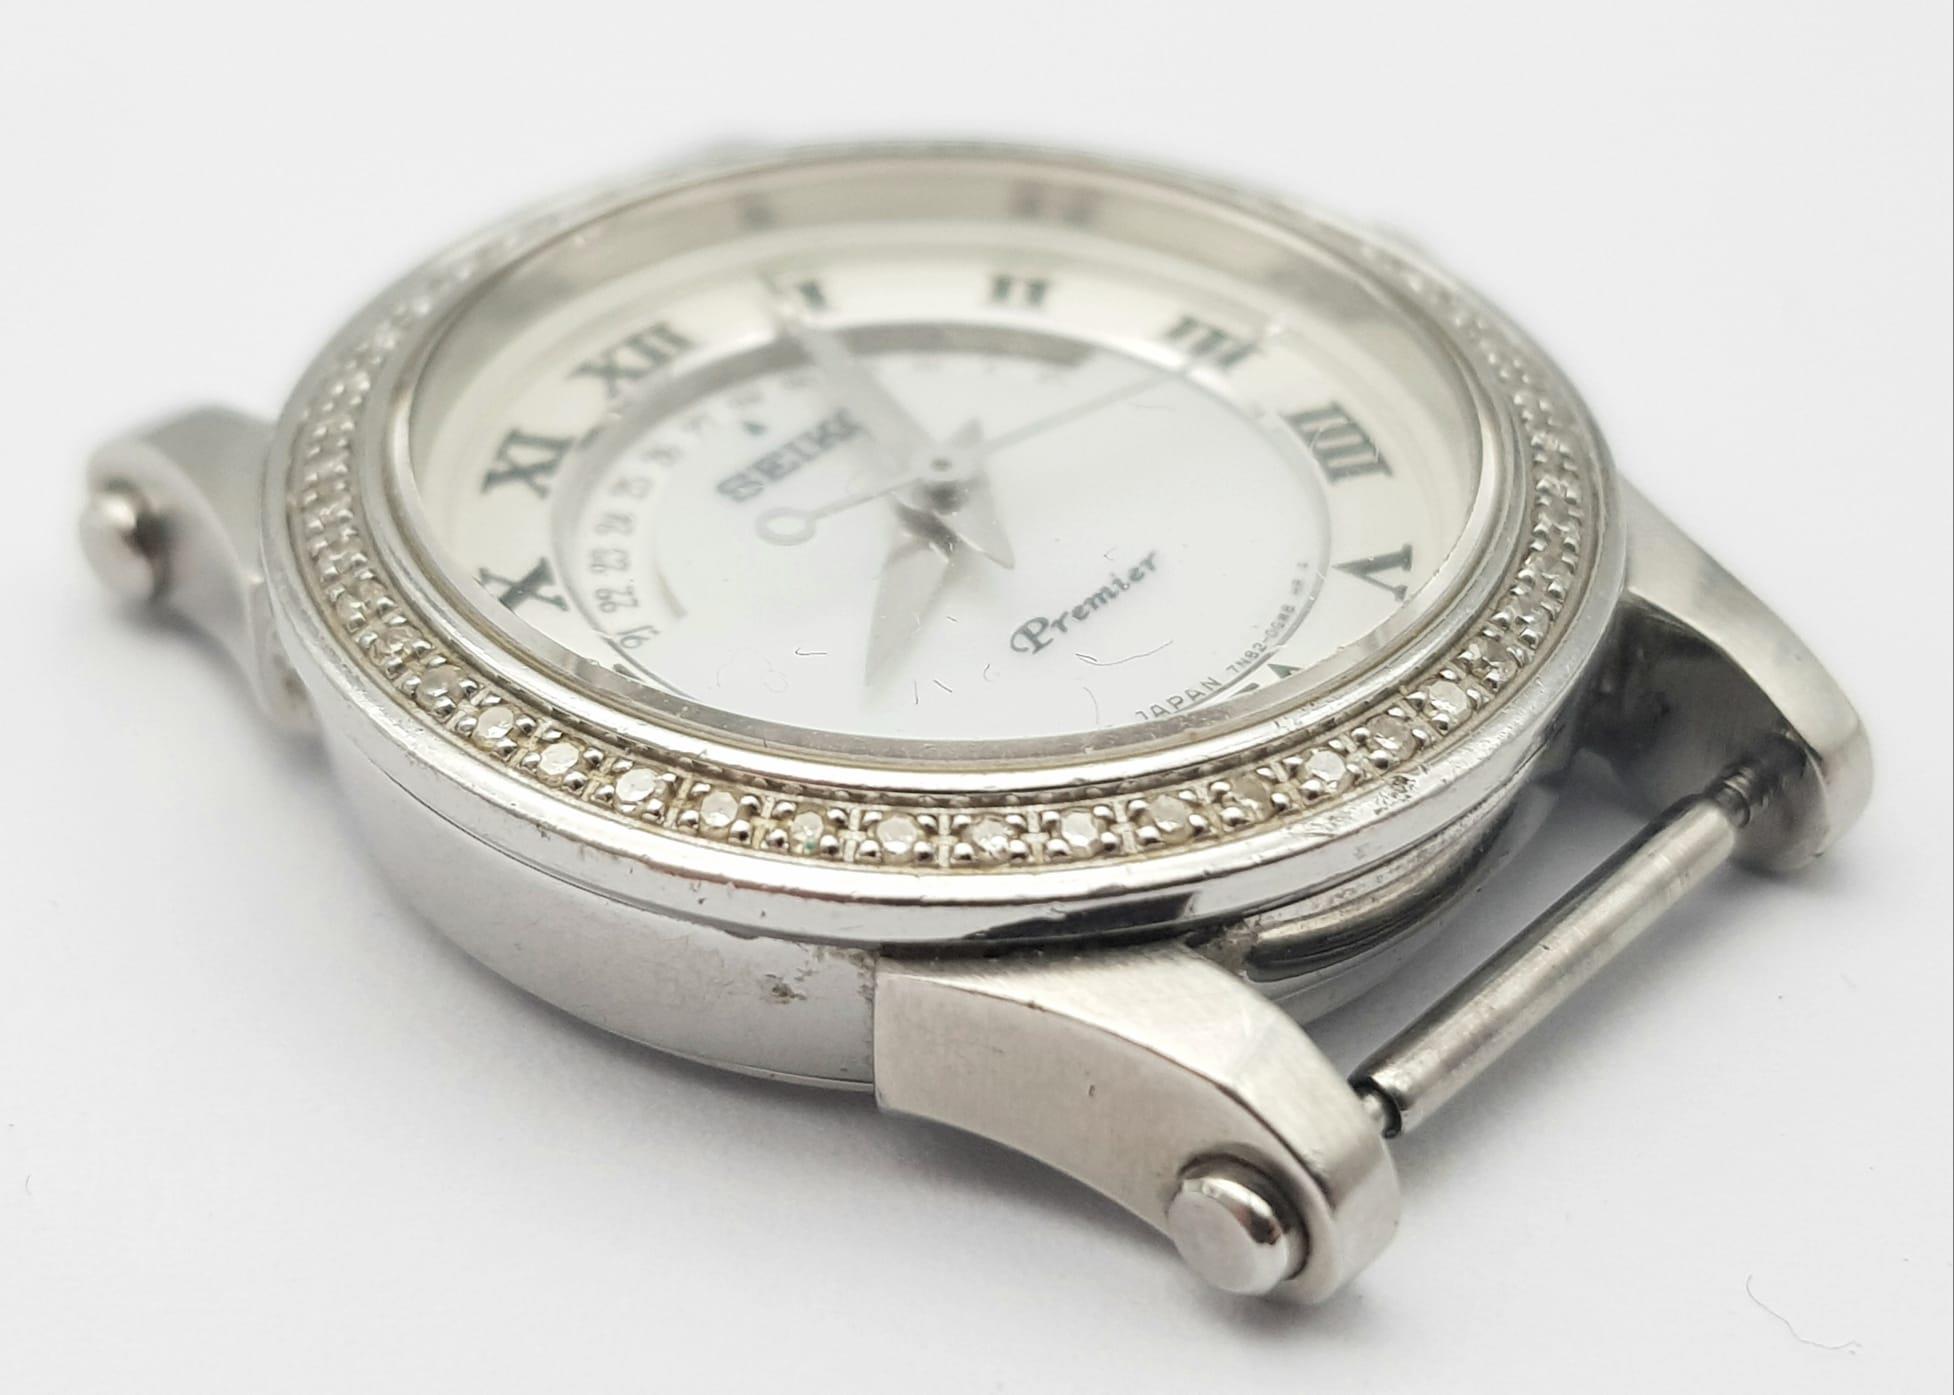 A Seiko Premier Ladies Diamond Watch Case. 27mm. Diamond bezel. Mother of pearl dial. In working - Image 3 of 7